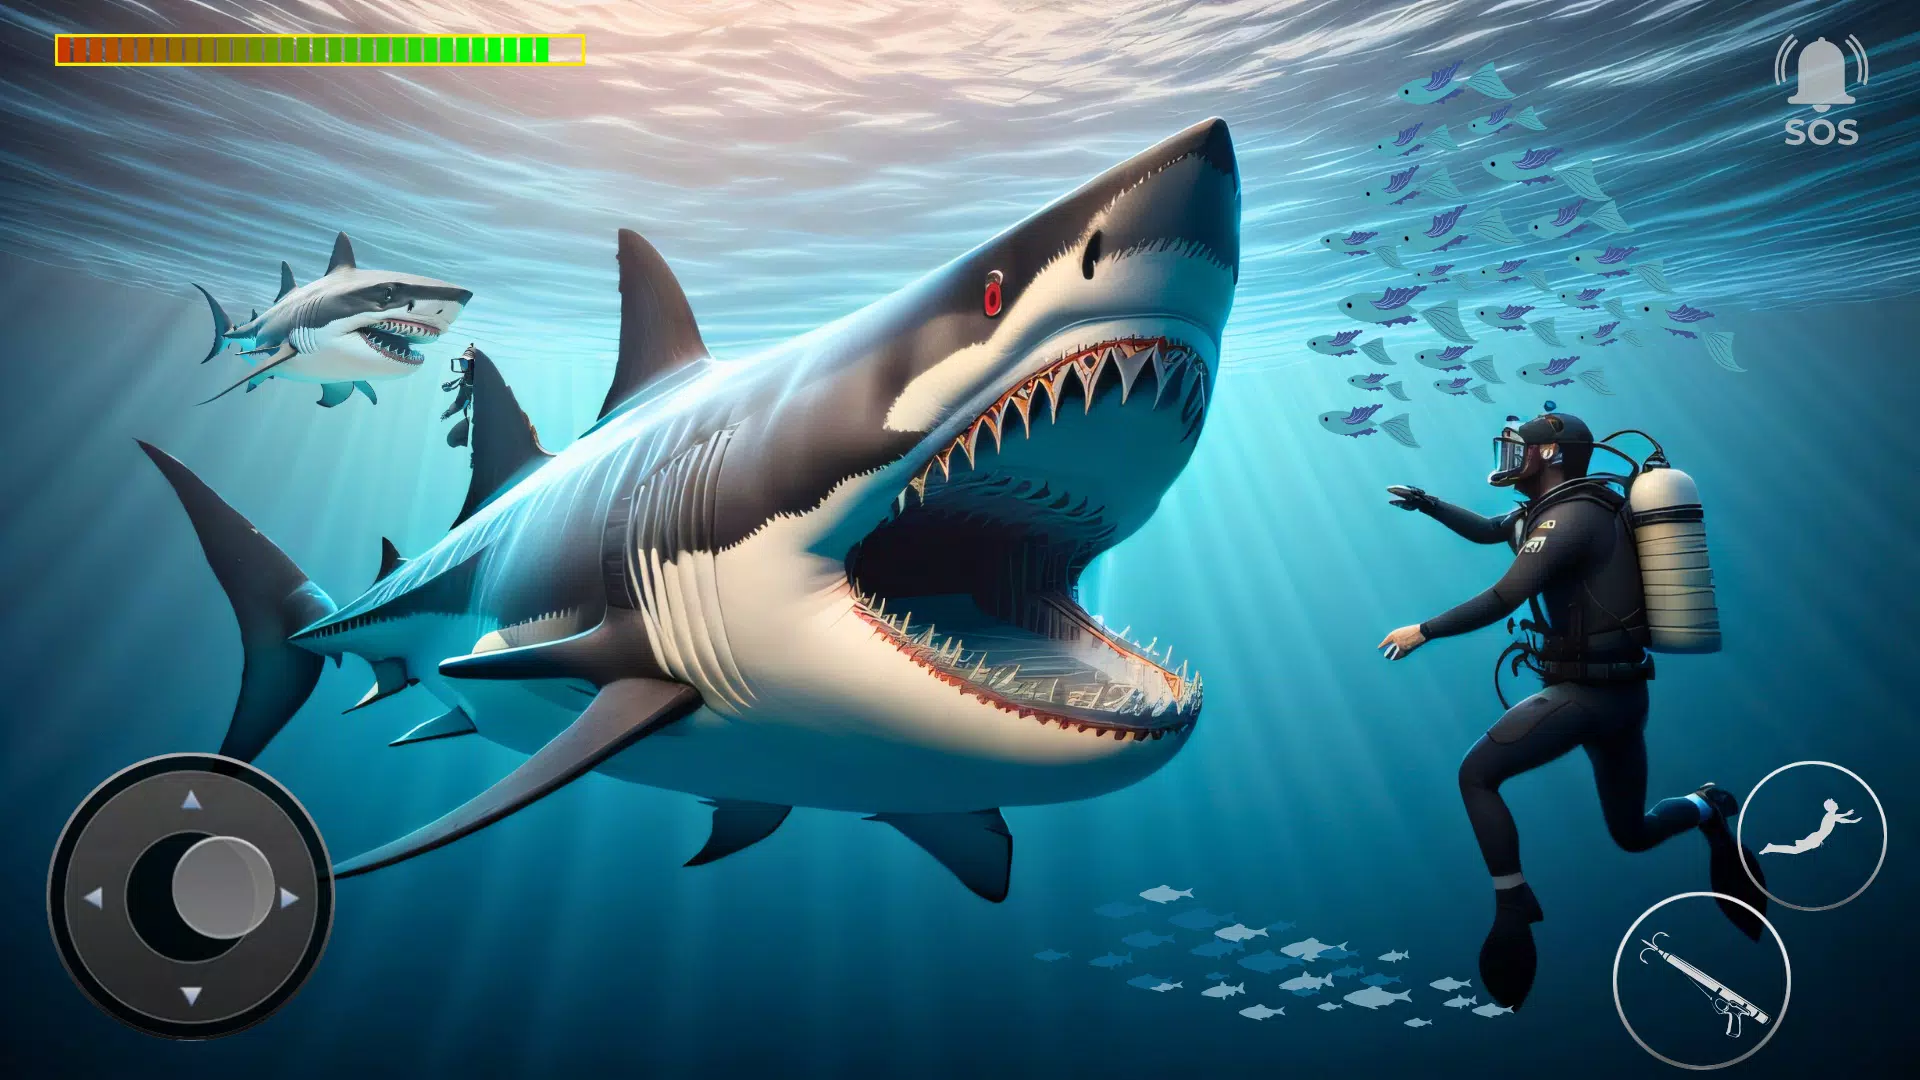 Angry Shark Attack Game APK for Android Download